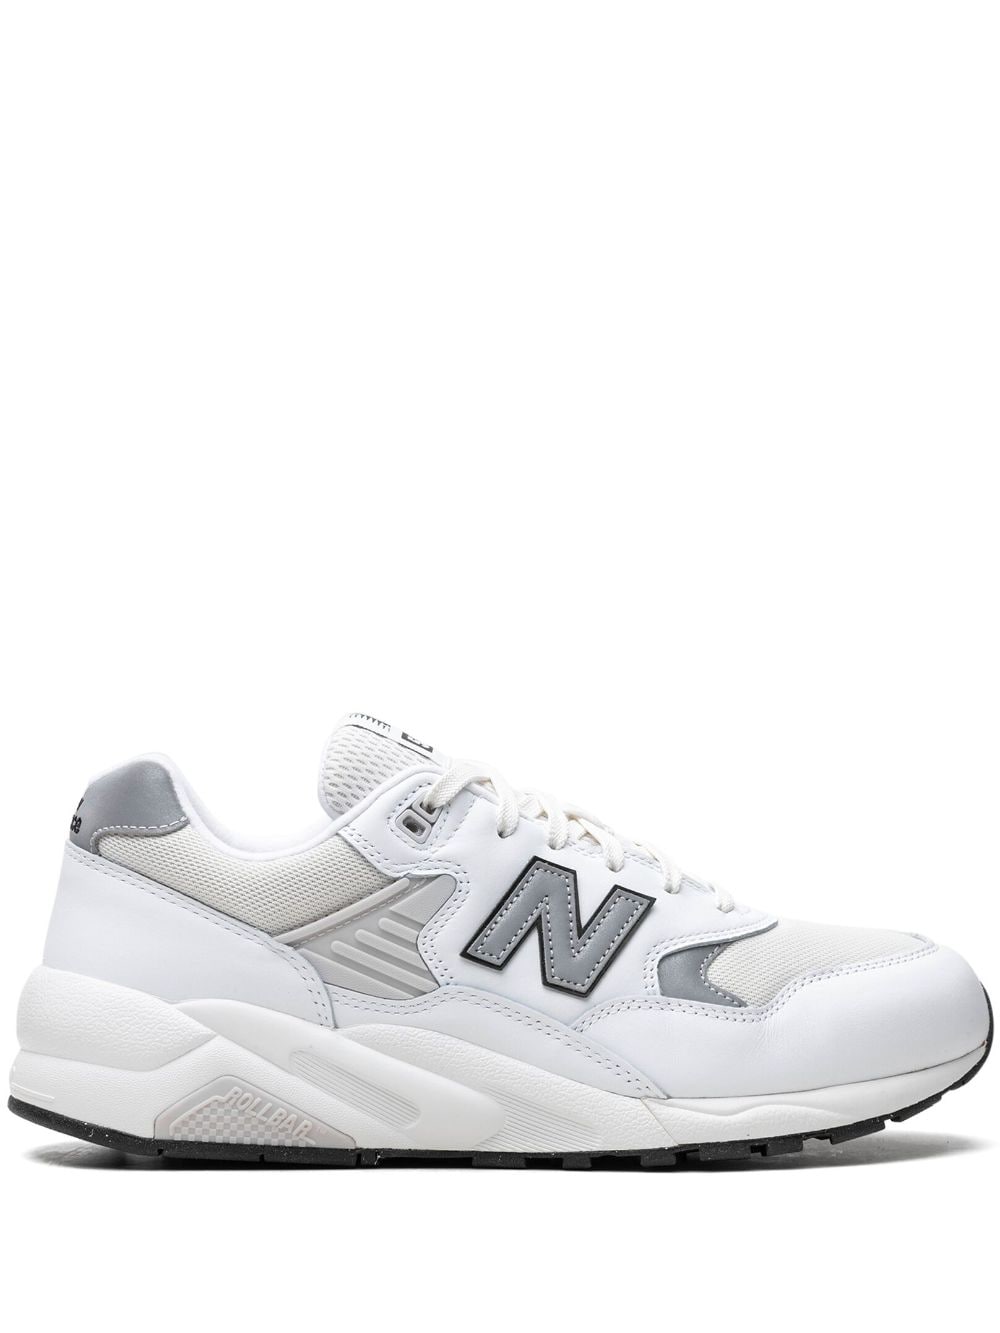 New Balance 580 low-top sneakers - White von New Balance